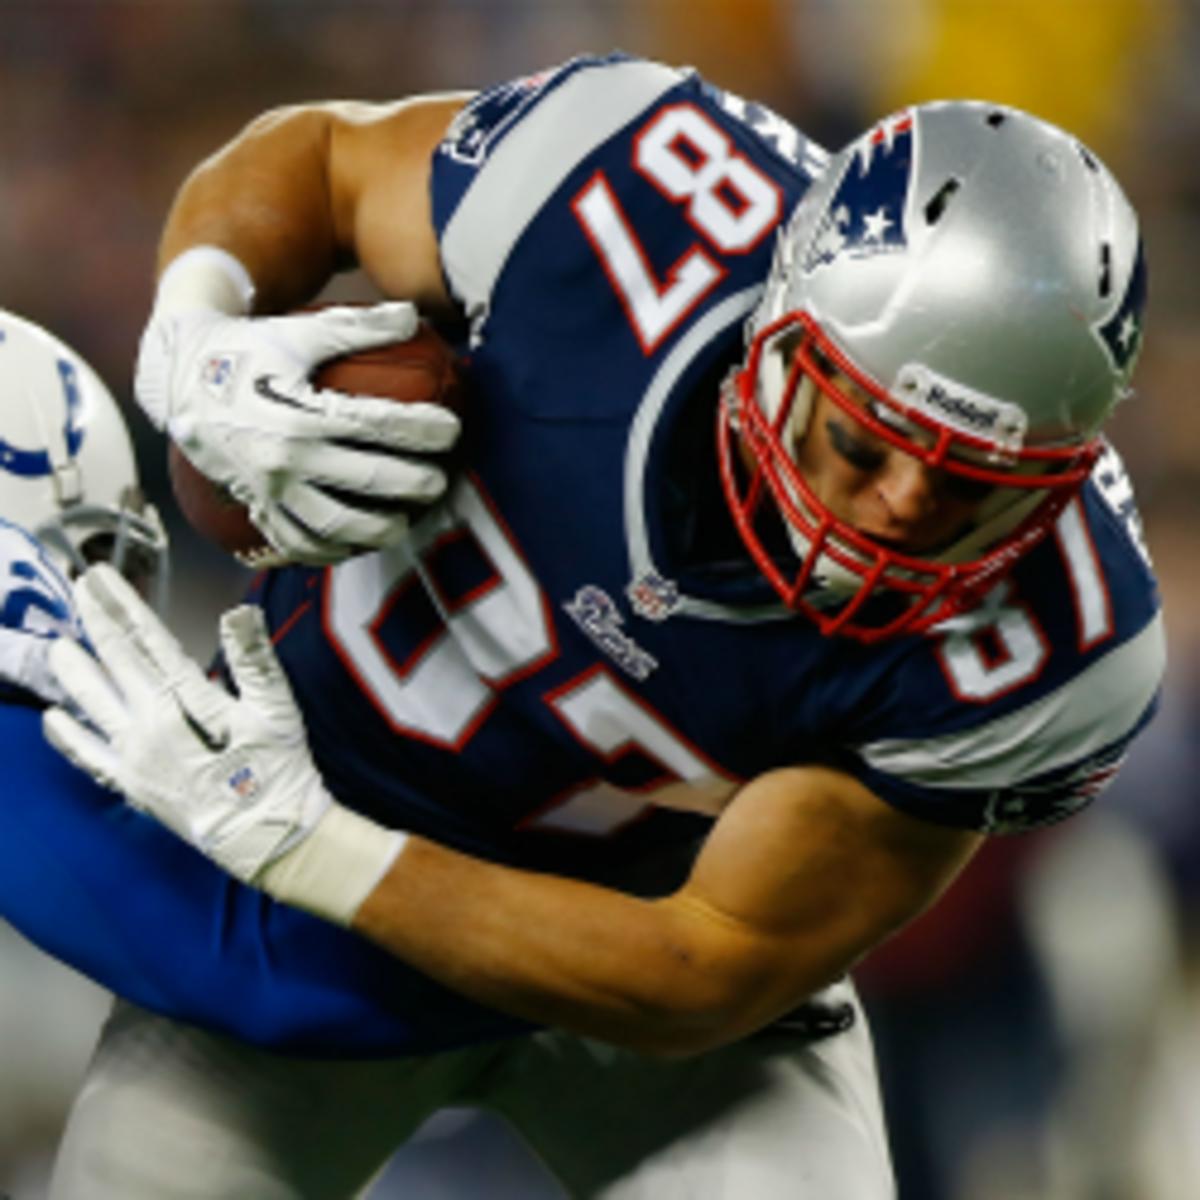 Patriots tight end Rob Gronkowski is one of 19 players listed as questionable for Sunday. (Jared Wickerham/Getty Images)